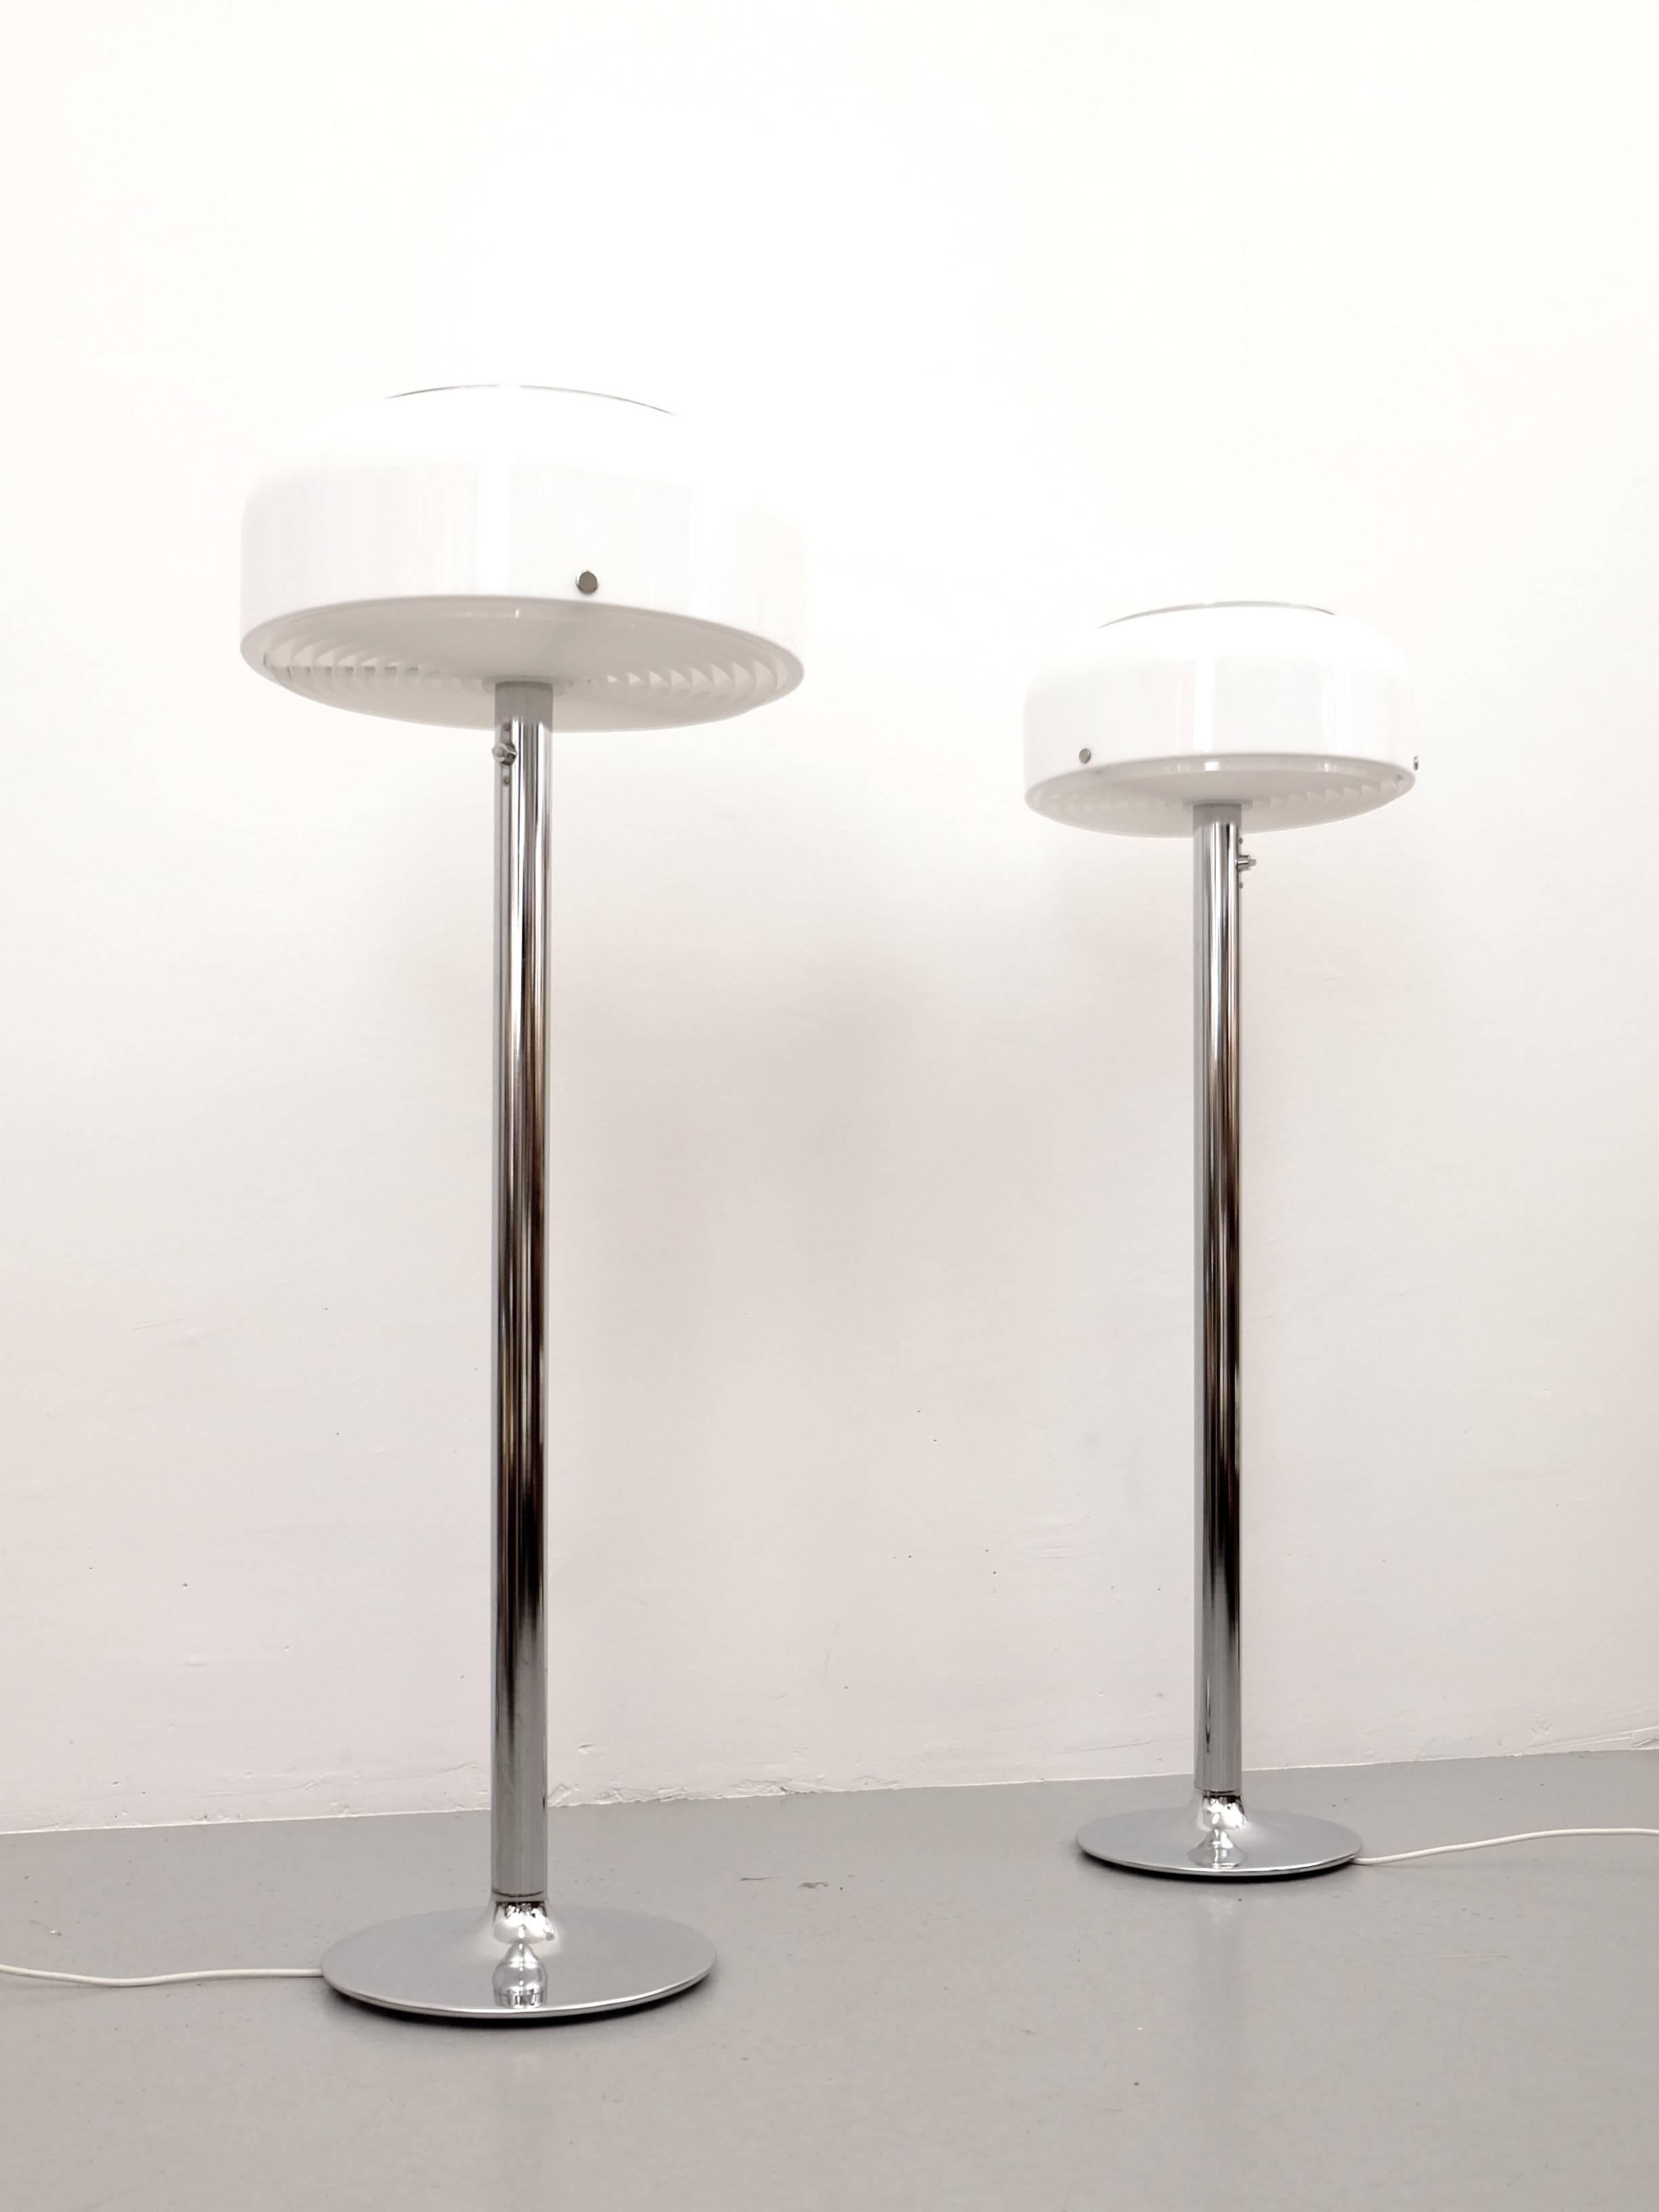 Modernist acrylic shade and chromed base by Swedish designer Anders Pehrson for Ateljé Lyktan, 1970s.

Please note: Size differs, one is bigger than the other.

        